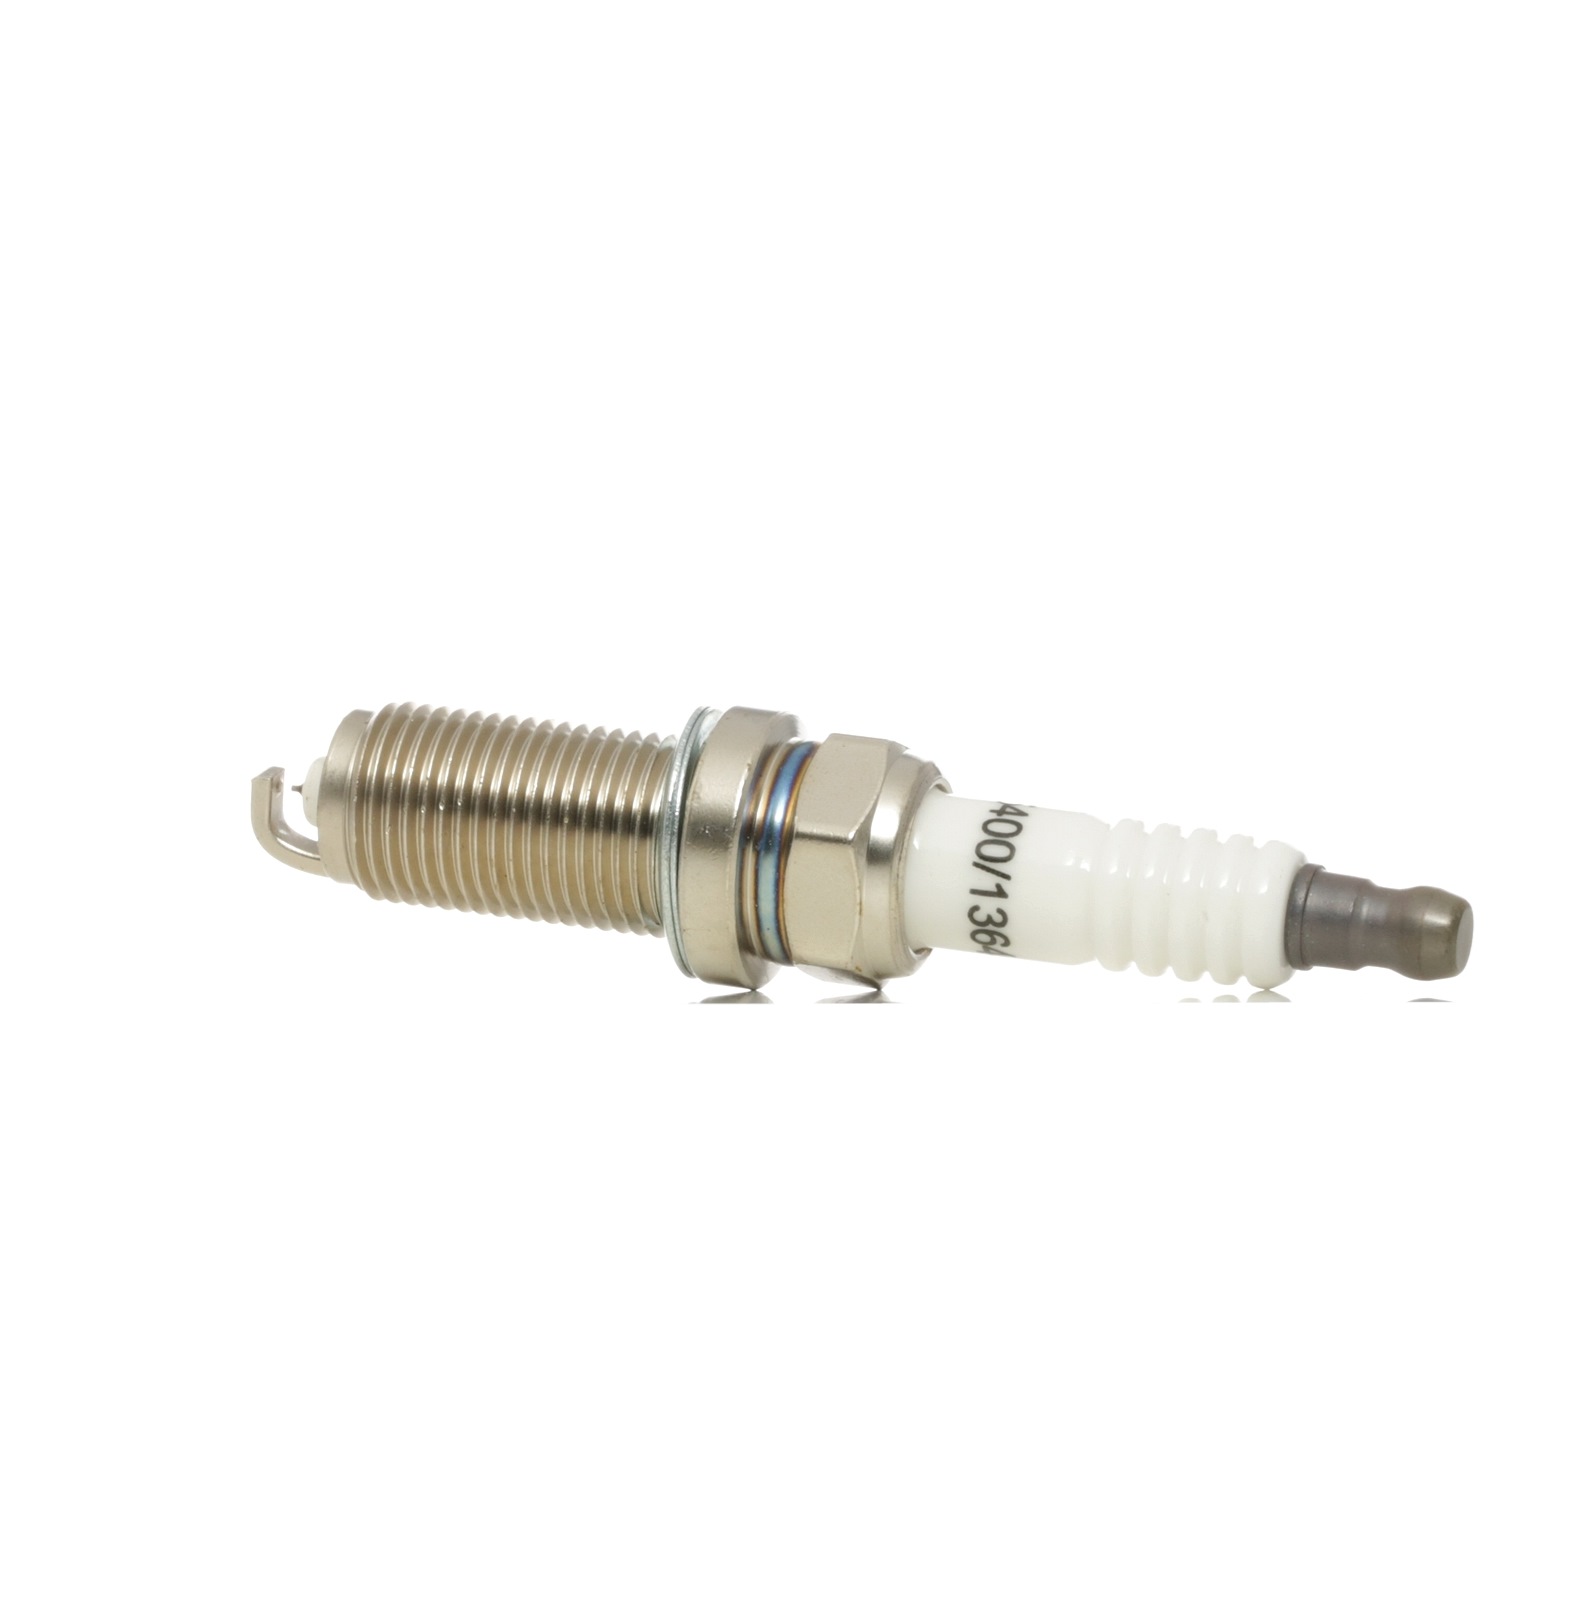 RIDEX 686S0032 Spark plug cheap in online store